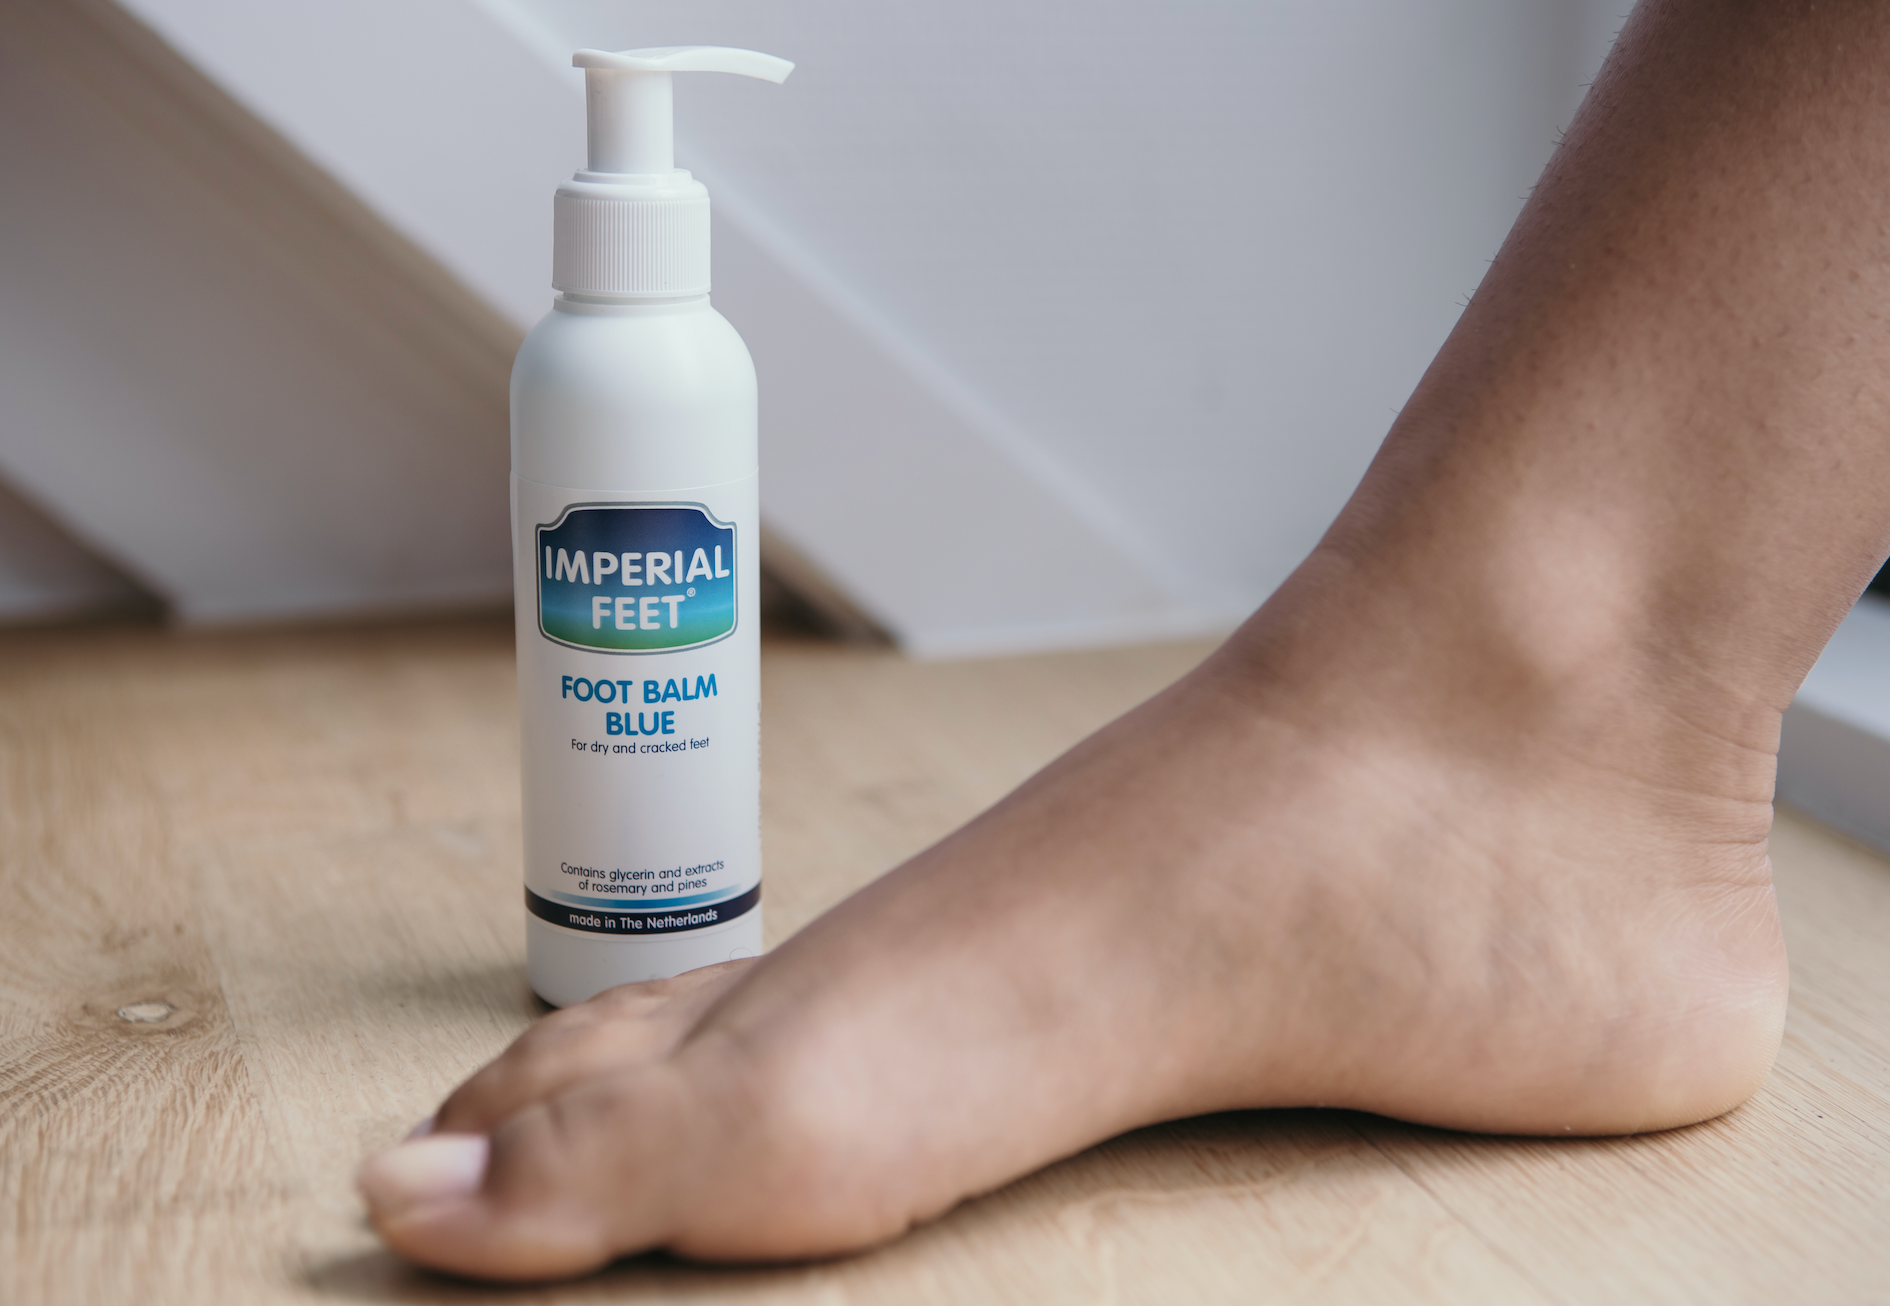 It's time to moisturize your feet: Foot Balm Blue - Imperial Feet - 